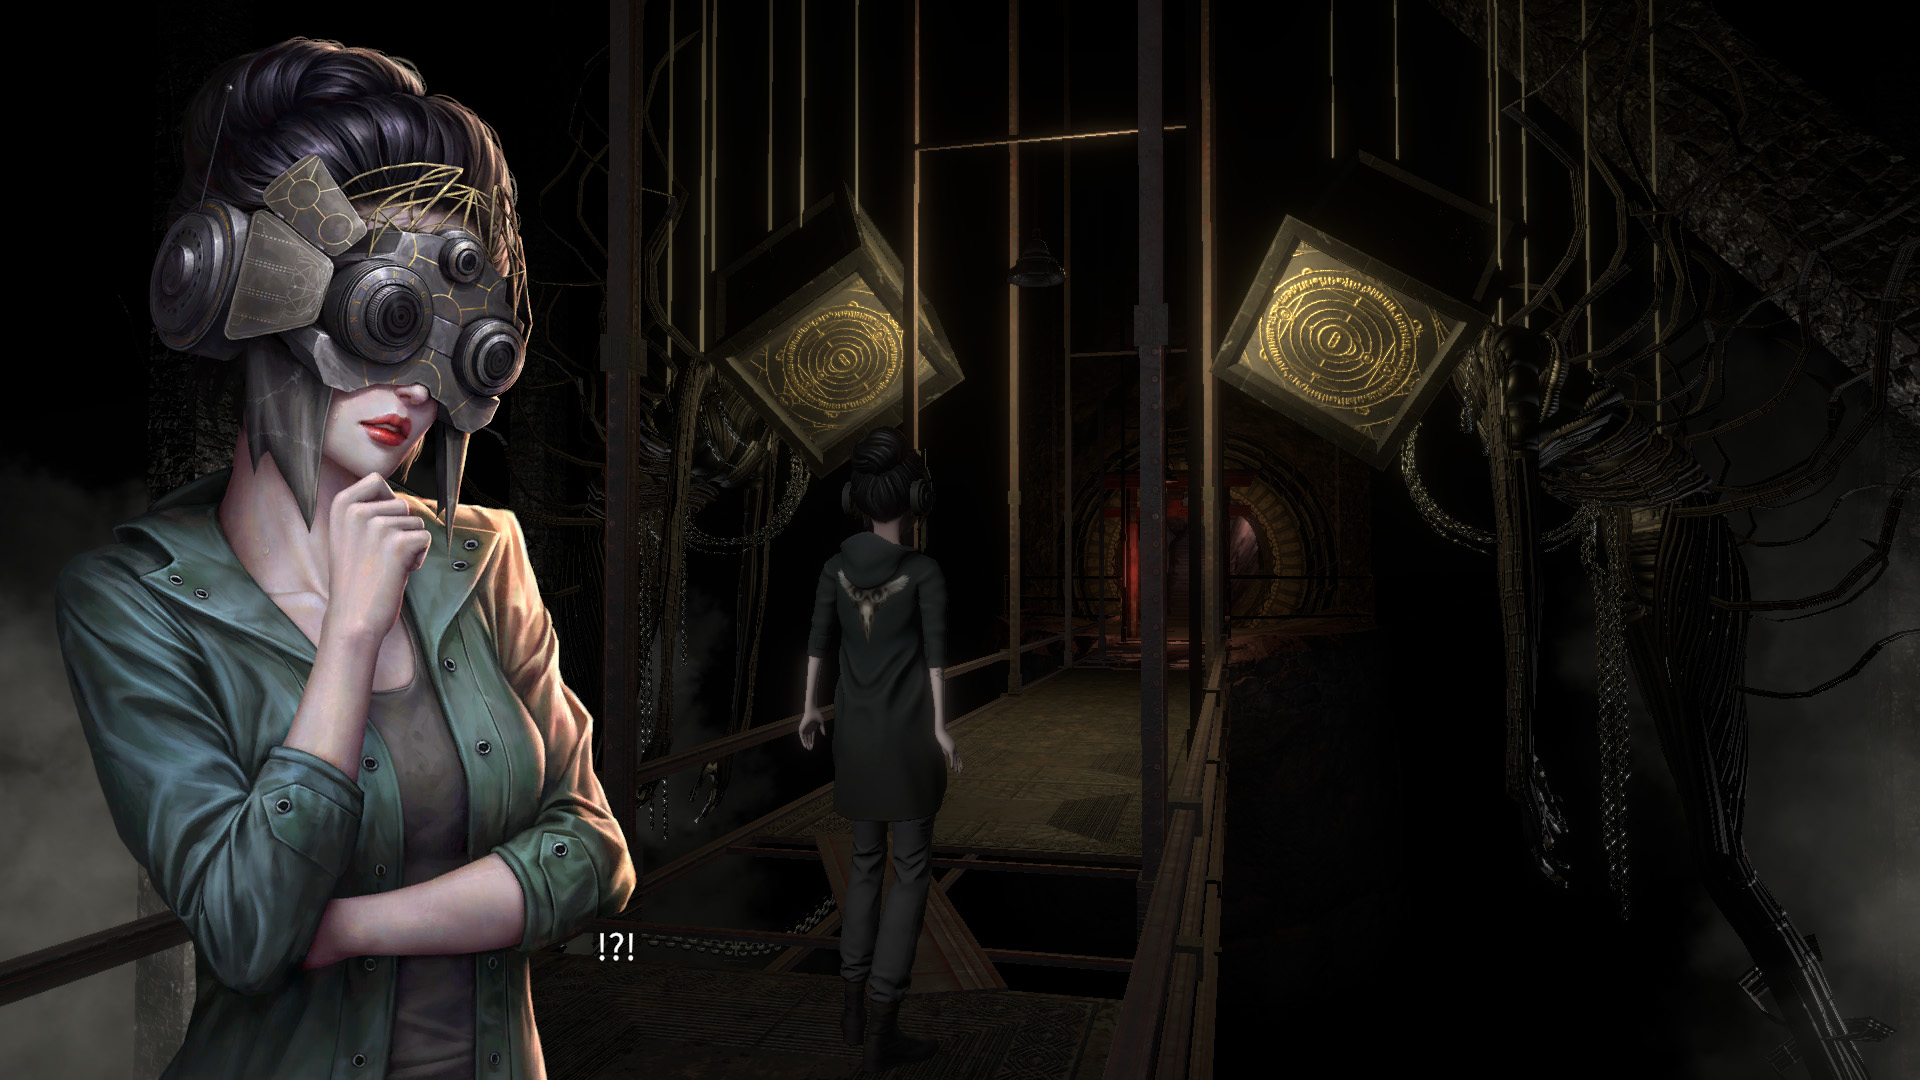 A screenshot from EXIT VEIL featuring the main character, Tori, in front of two mechanical creatures. A drawn image of an uneasy Tori is in the foreground.